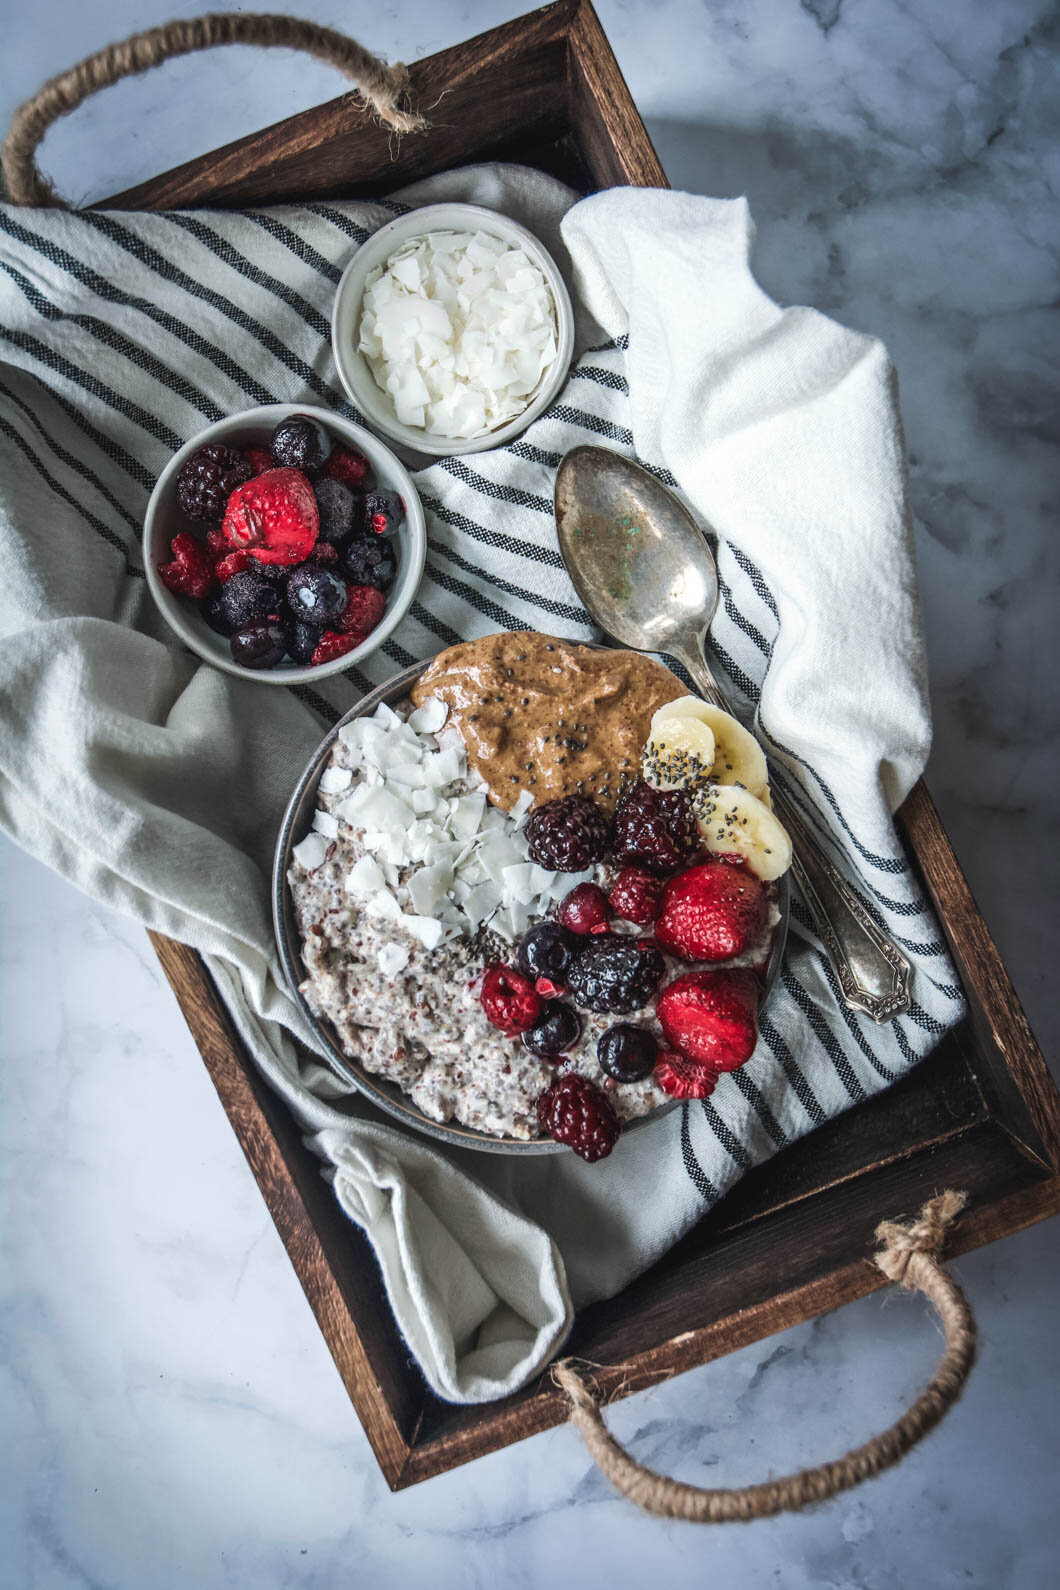  Overnight paleo oatmeal on tray with fruit and coconut flakes, napkin and spoon